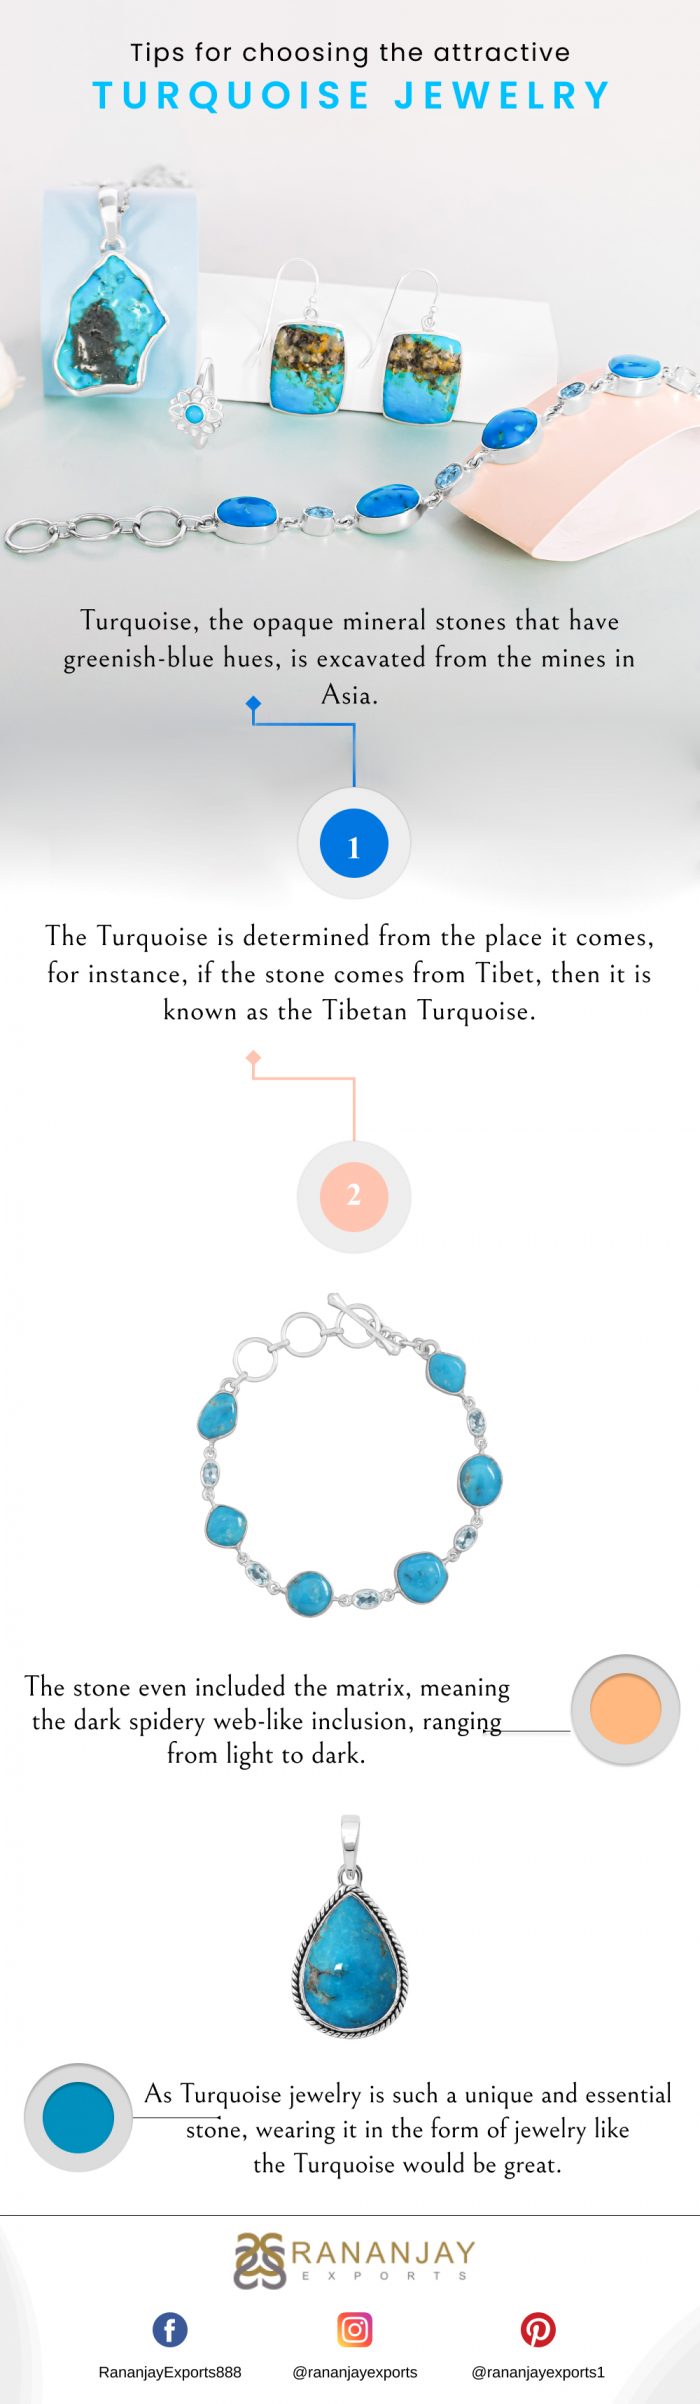 Tips for choosing the attractive Turquoise jewelry